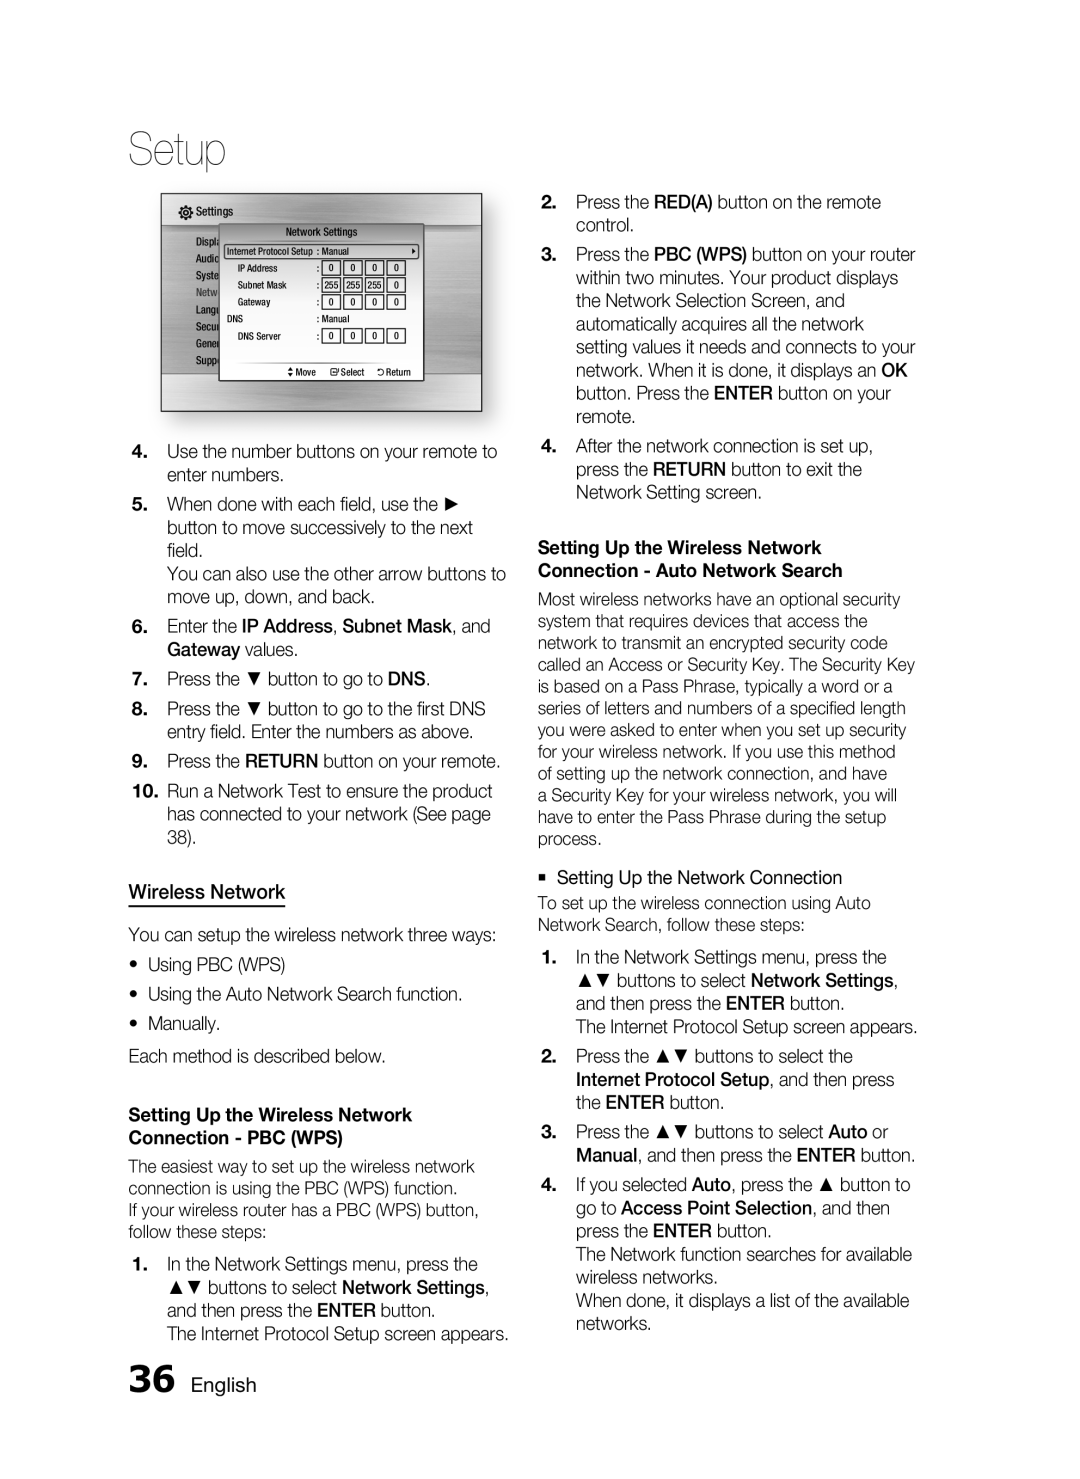 Samsung HT-C5200 user manual English, Setup, Setting Up the Wireless Network, Connection - PBC WPS 